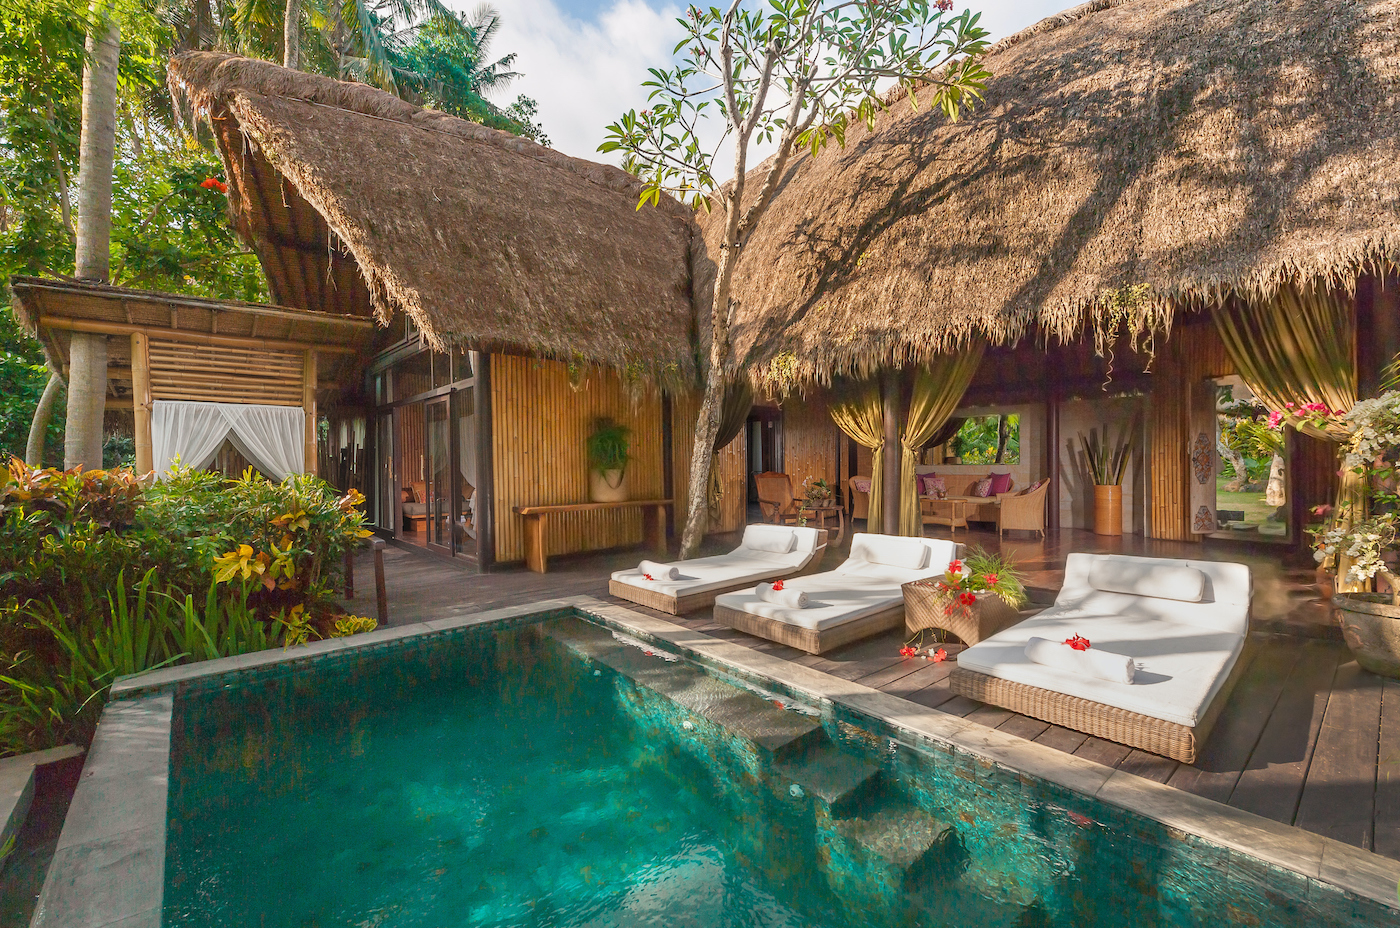 The 10 Best Eco Friendly Hotels In Bali Tried And Tested The Hotel Journal